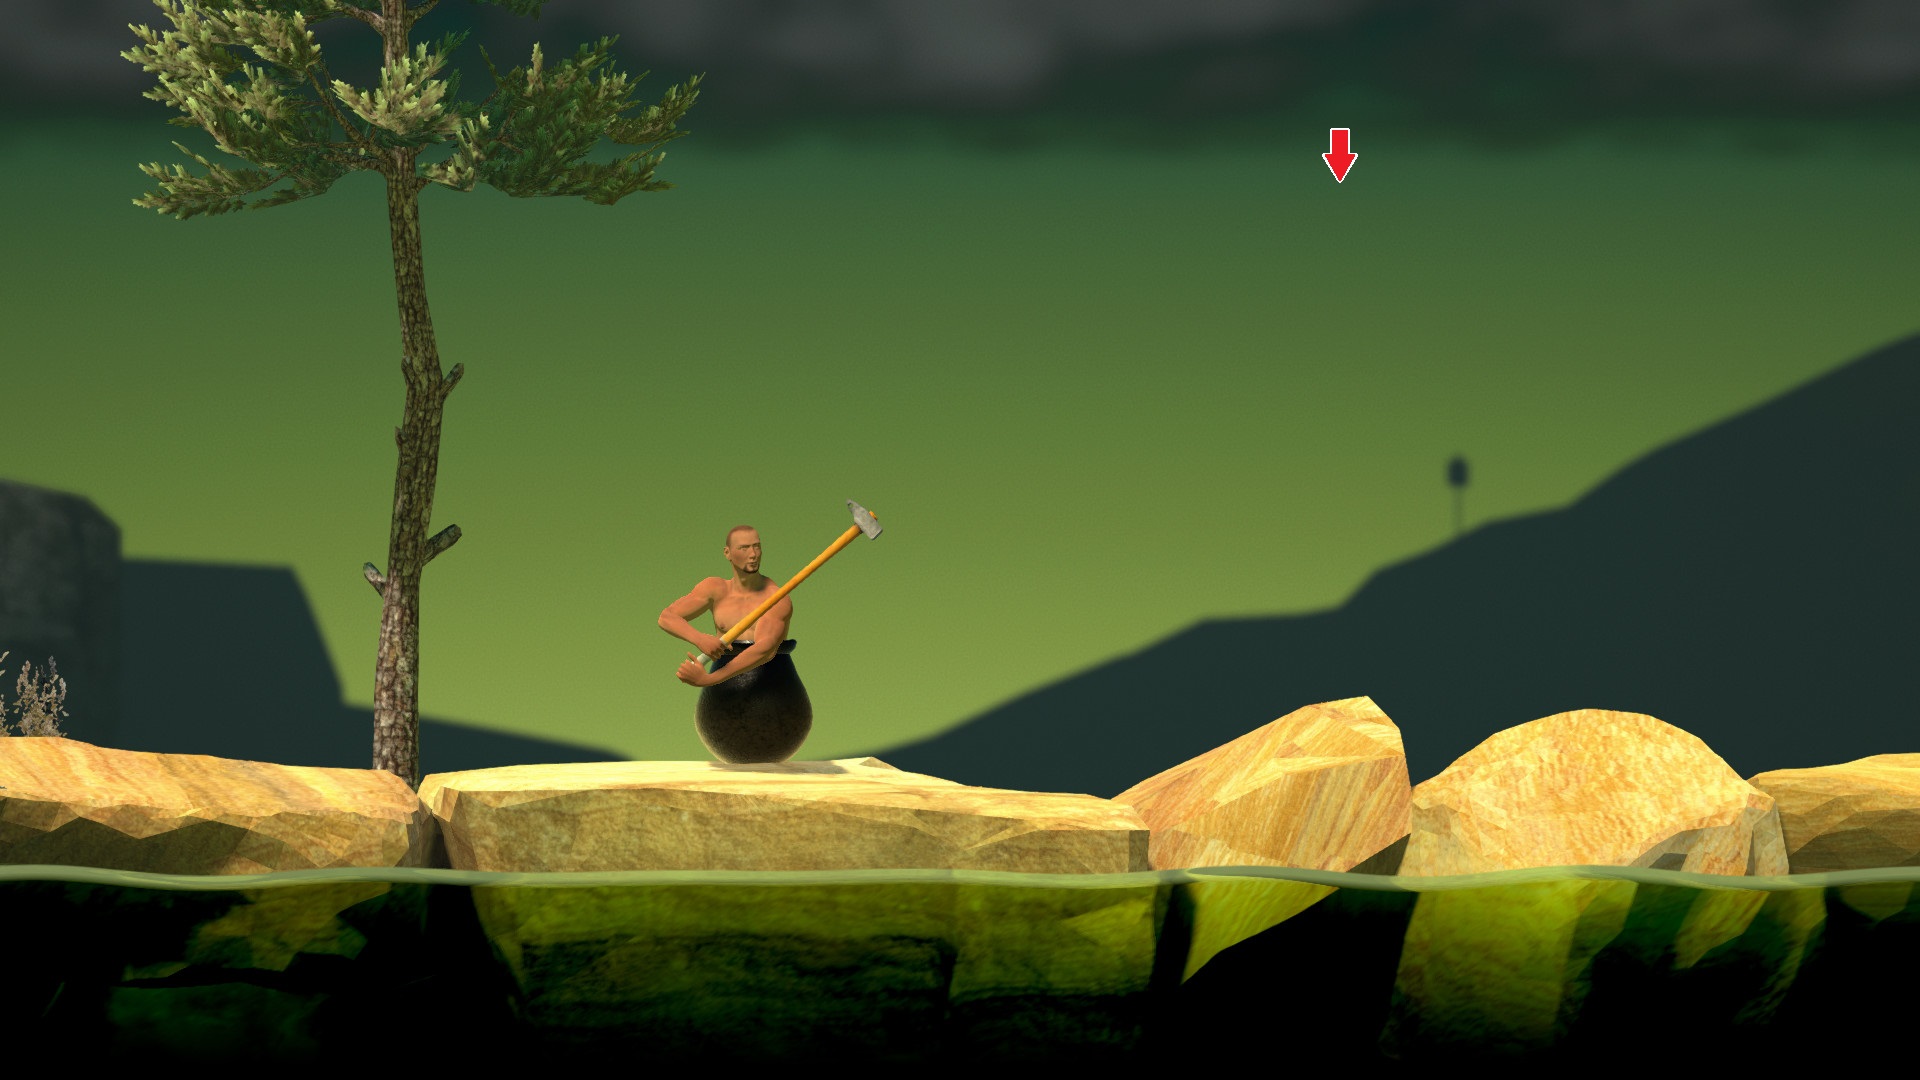 Map Getting Over It with Bennett Foddy APK pour Android Télécharger